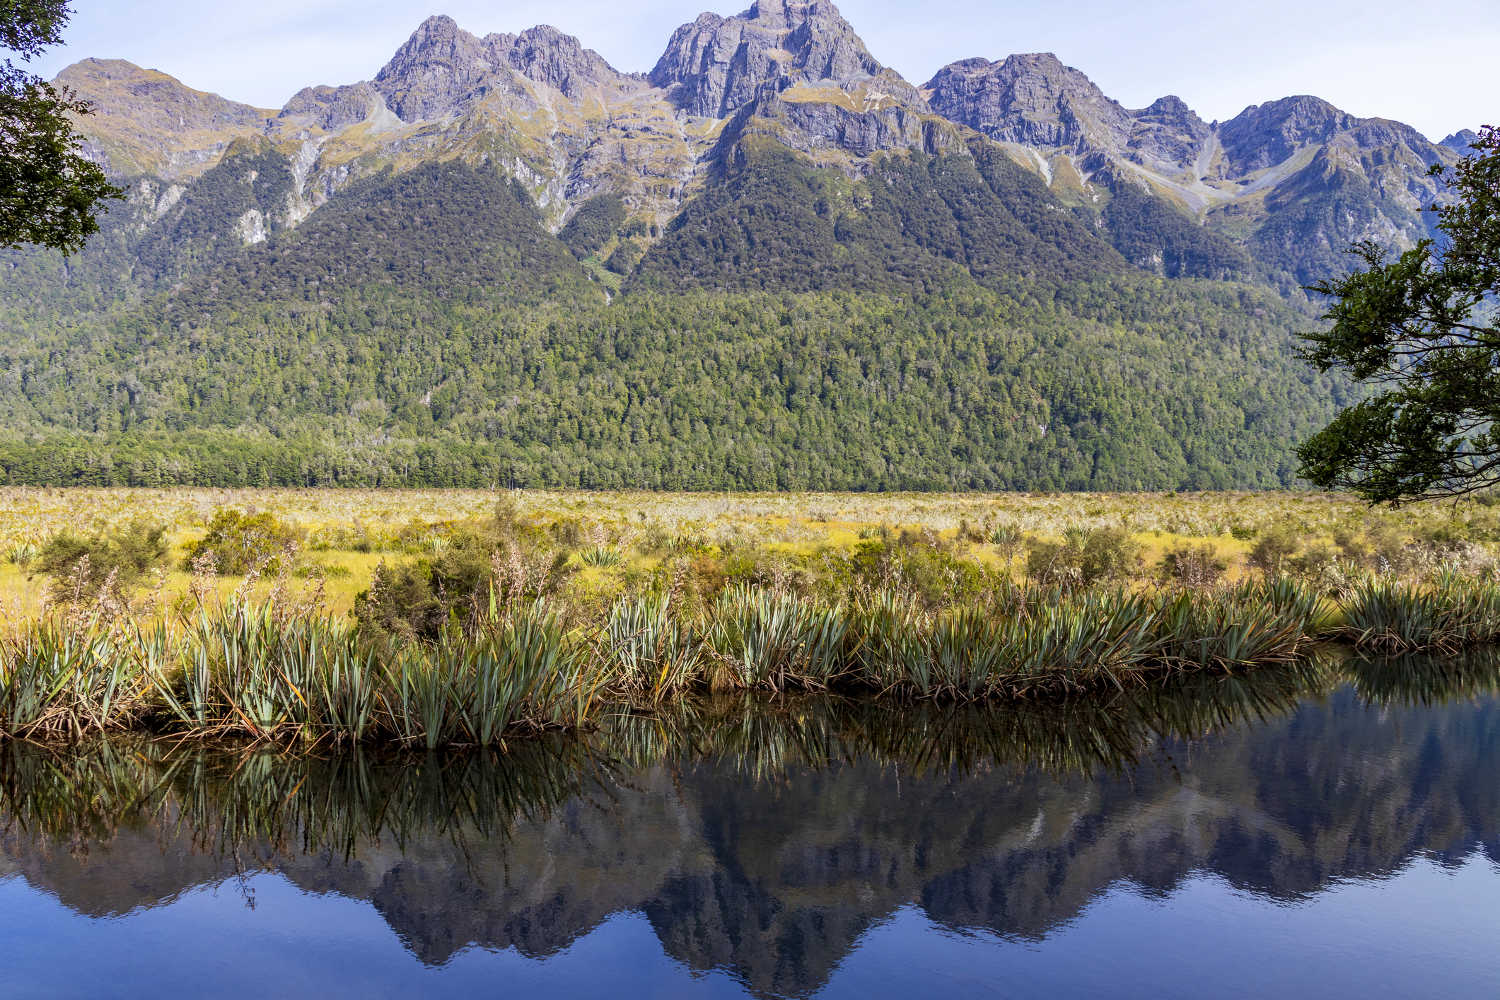 Mirror lake at Eglinton valley in New Zealand